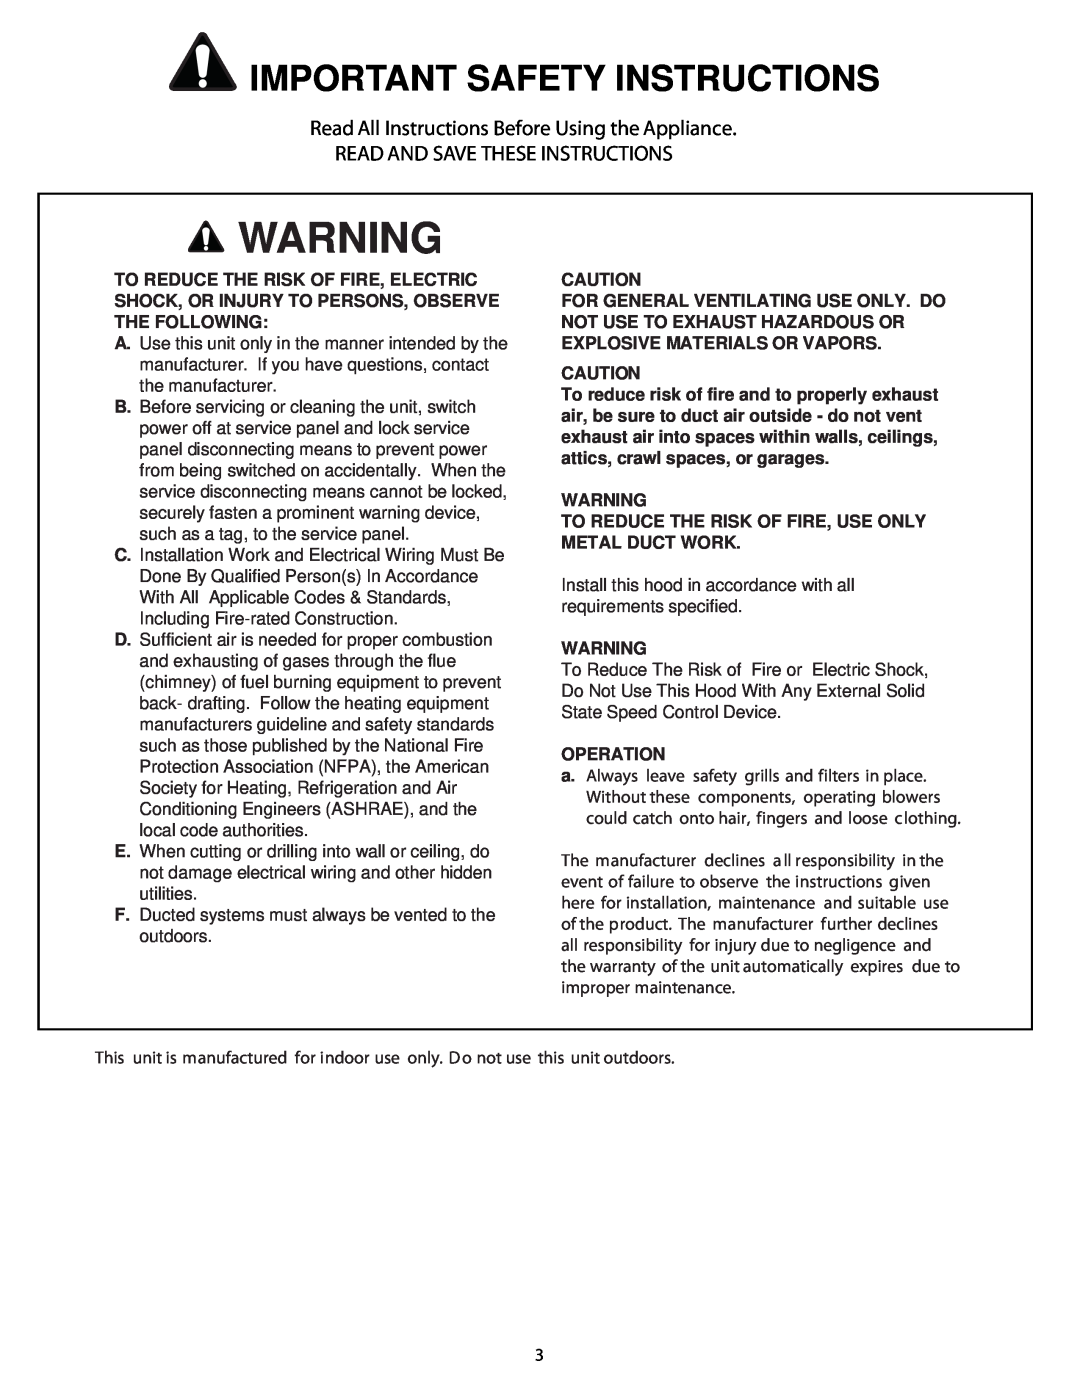 Thermador HMWB30, HMWB36 installation manual Important Safety Instructions, Read All Instructions Before Using the Appliance 